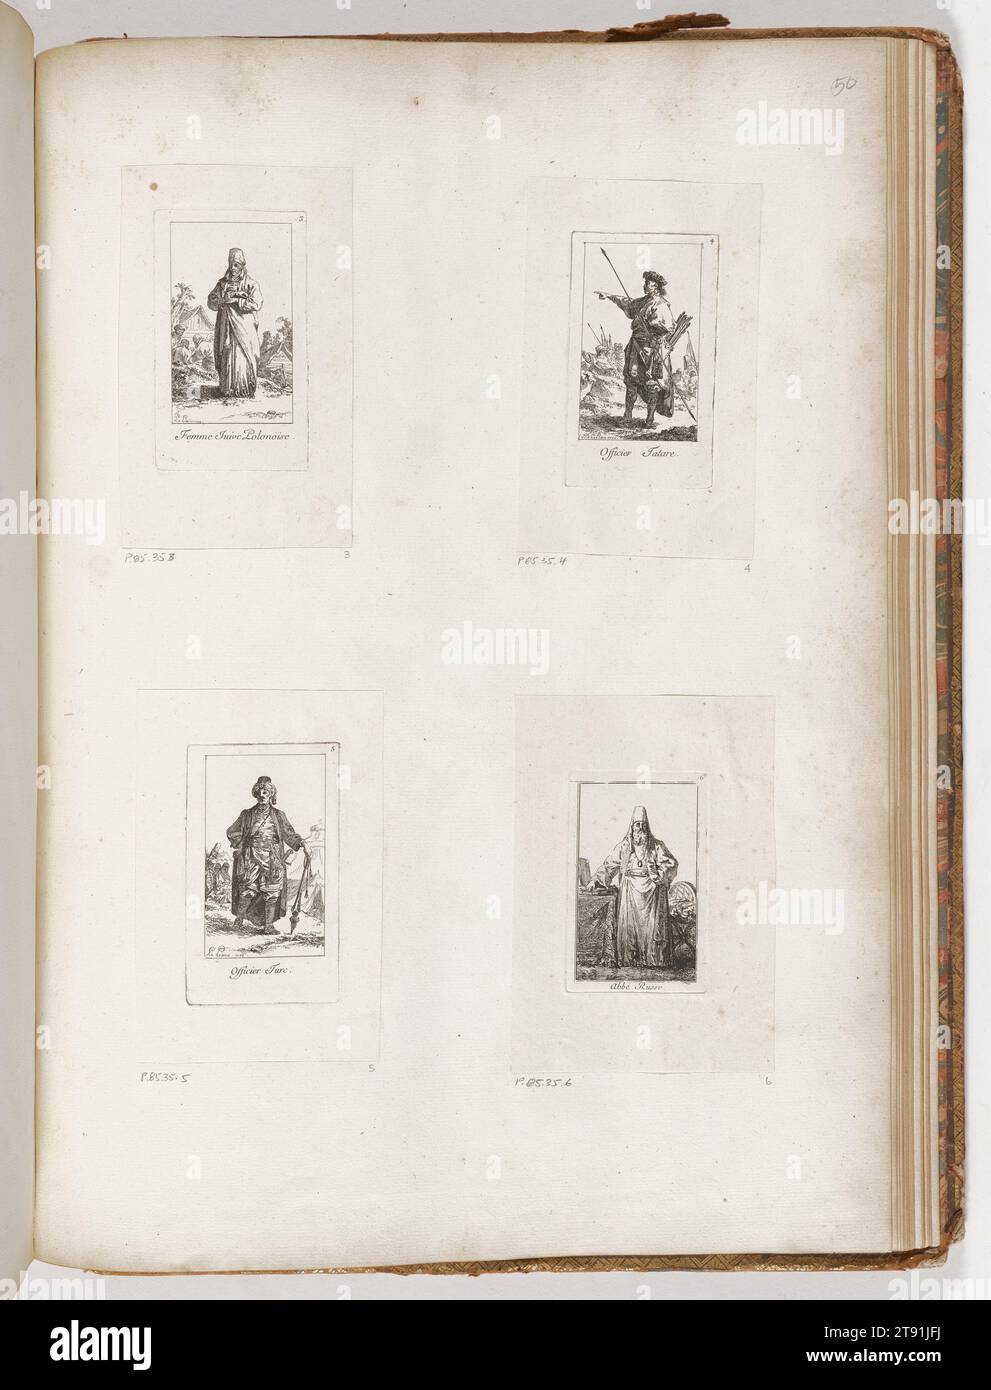 Russian Abbot, 1765, Jean-Baptiste Le Prince, French, 1734 - 1781, 3 1/2 x 2 1/8 in. (8.89 x 5.4 cm) (image)3 7/8 x 2 1/2 in. (9.84 x 6.35 cm) (plate)6 5/8 x 4 5/8 in. (16.83 x 11.75 cm) (sheet), Etching, France, 18th century Stock Photo